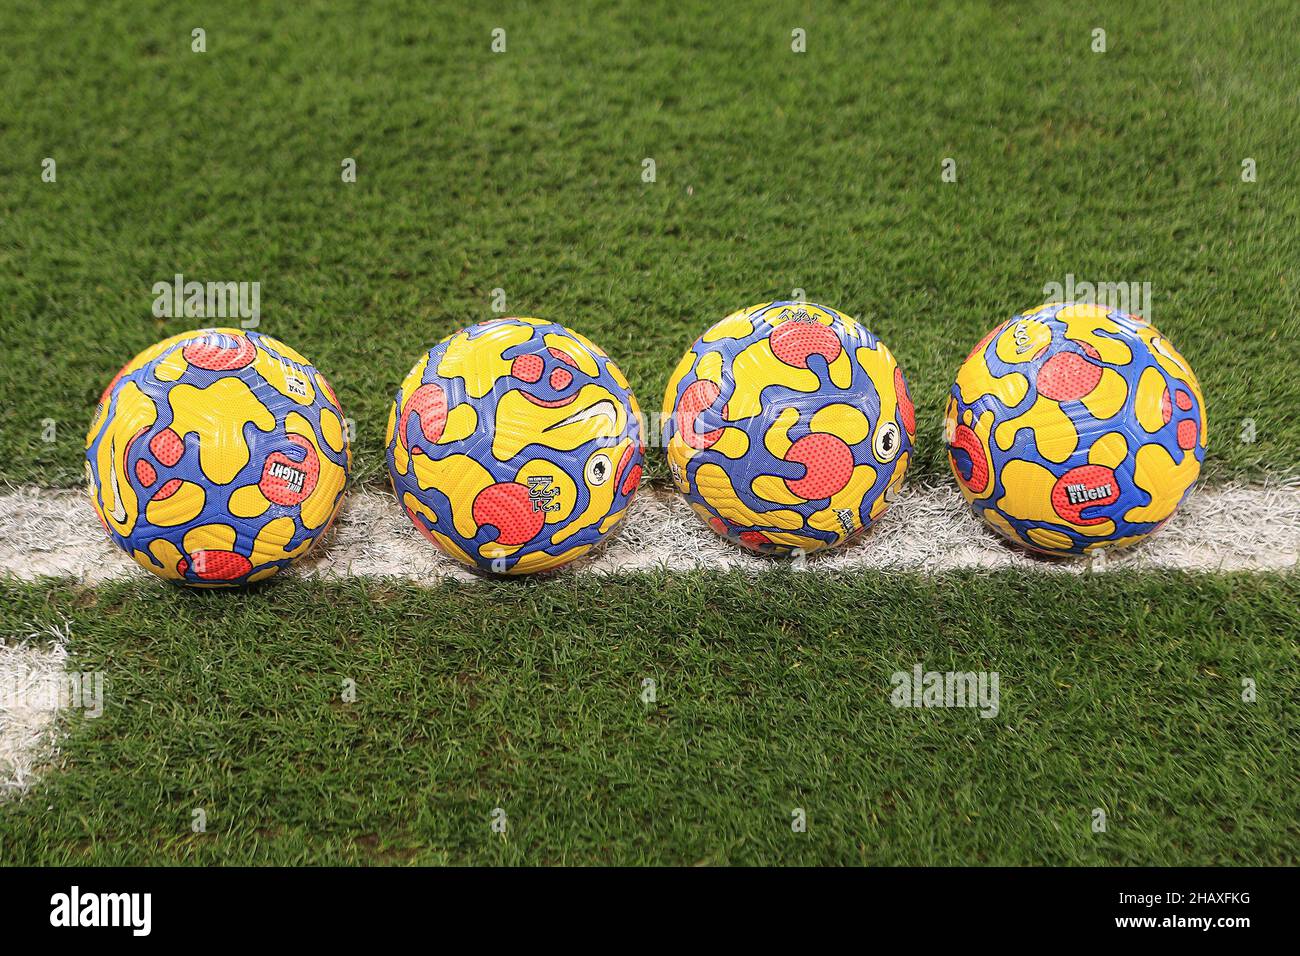 London, UK. 15th Dec, 2021. A group of Nike Flight winter Footballs are  seen in a line prior to kick off. Premier league match, Crystal Palace v  Southampton at Selhurst Park stadium